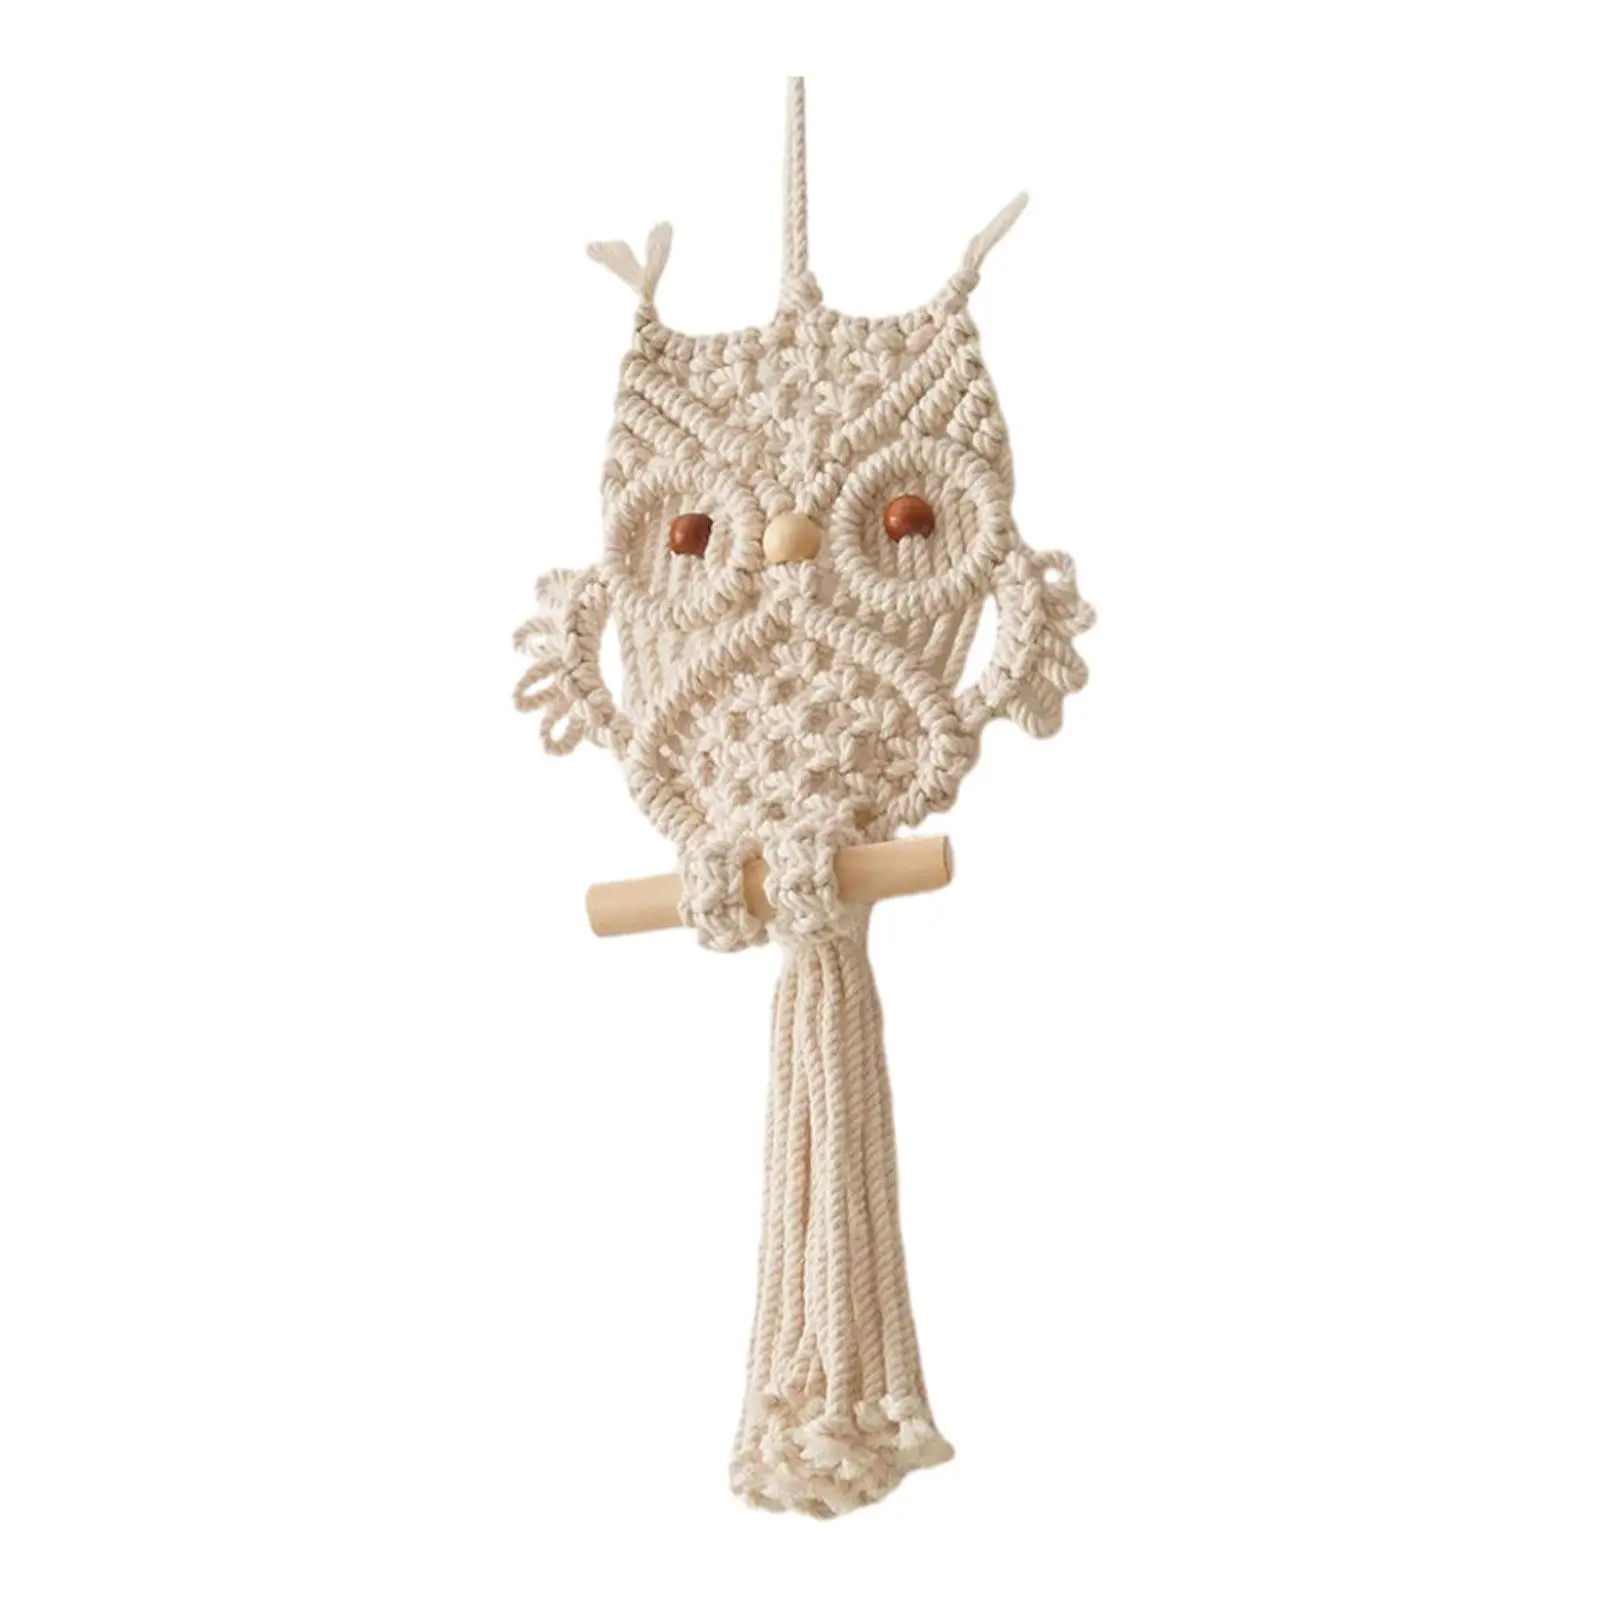 Owl Macrame Tapestry Wall Hanging Woven Bohemian Tapestry for Wedding Dorm